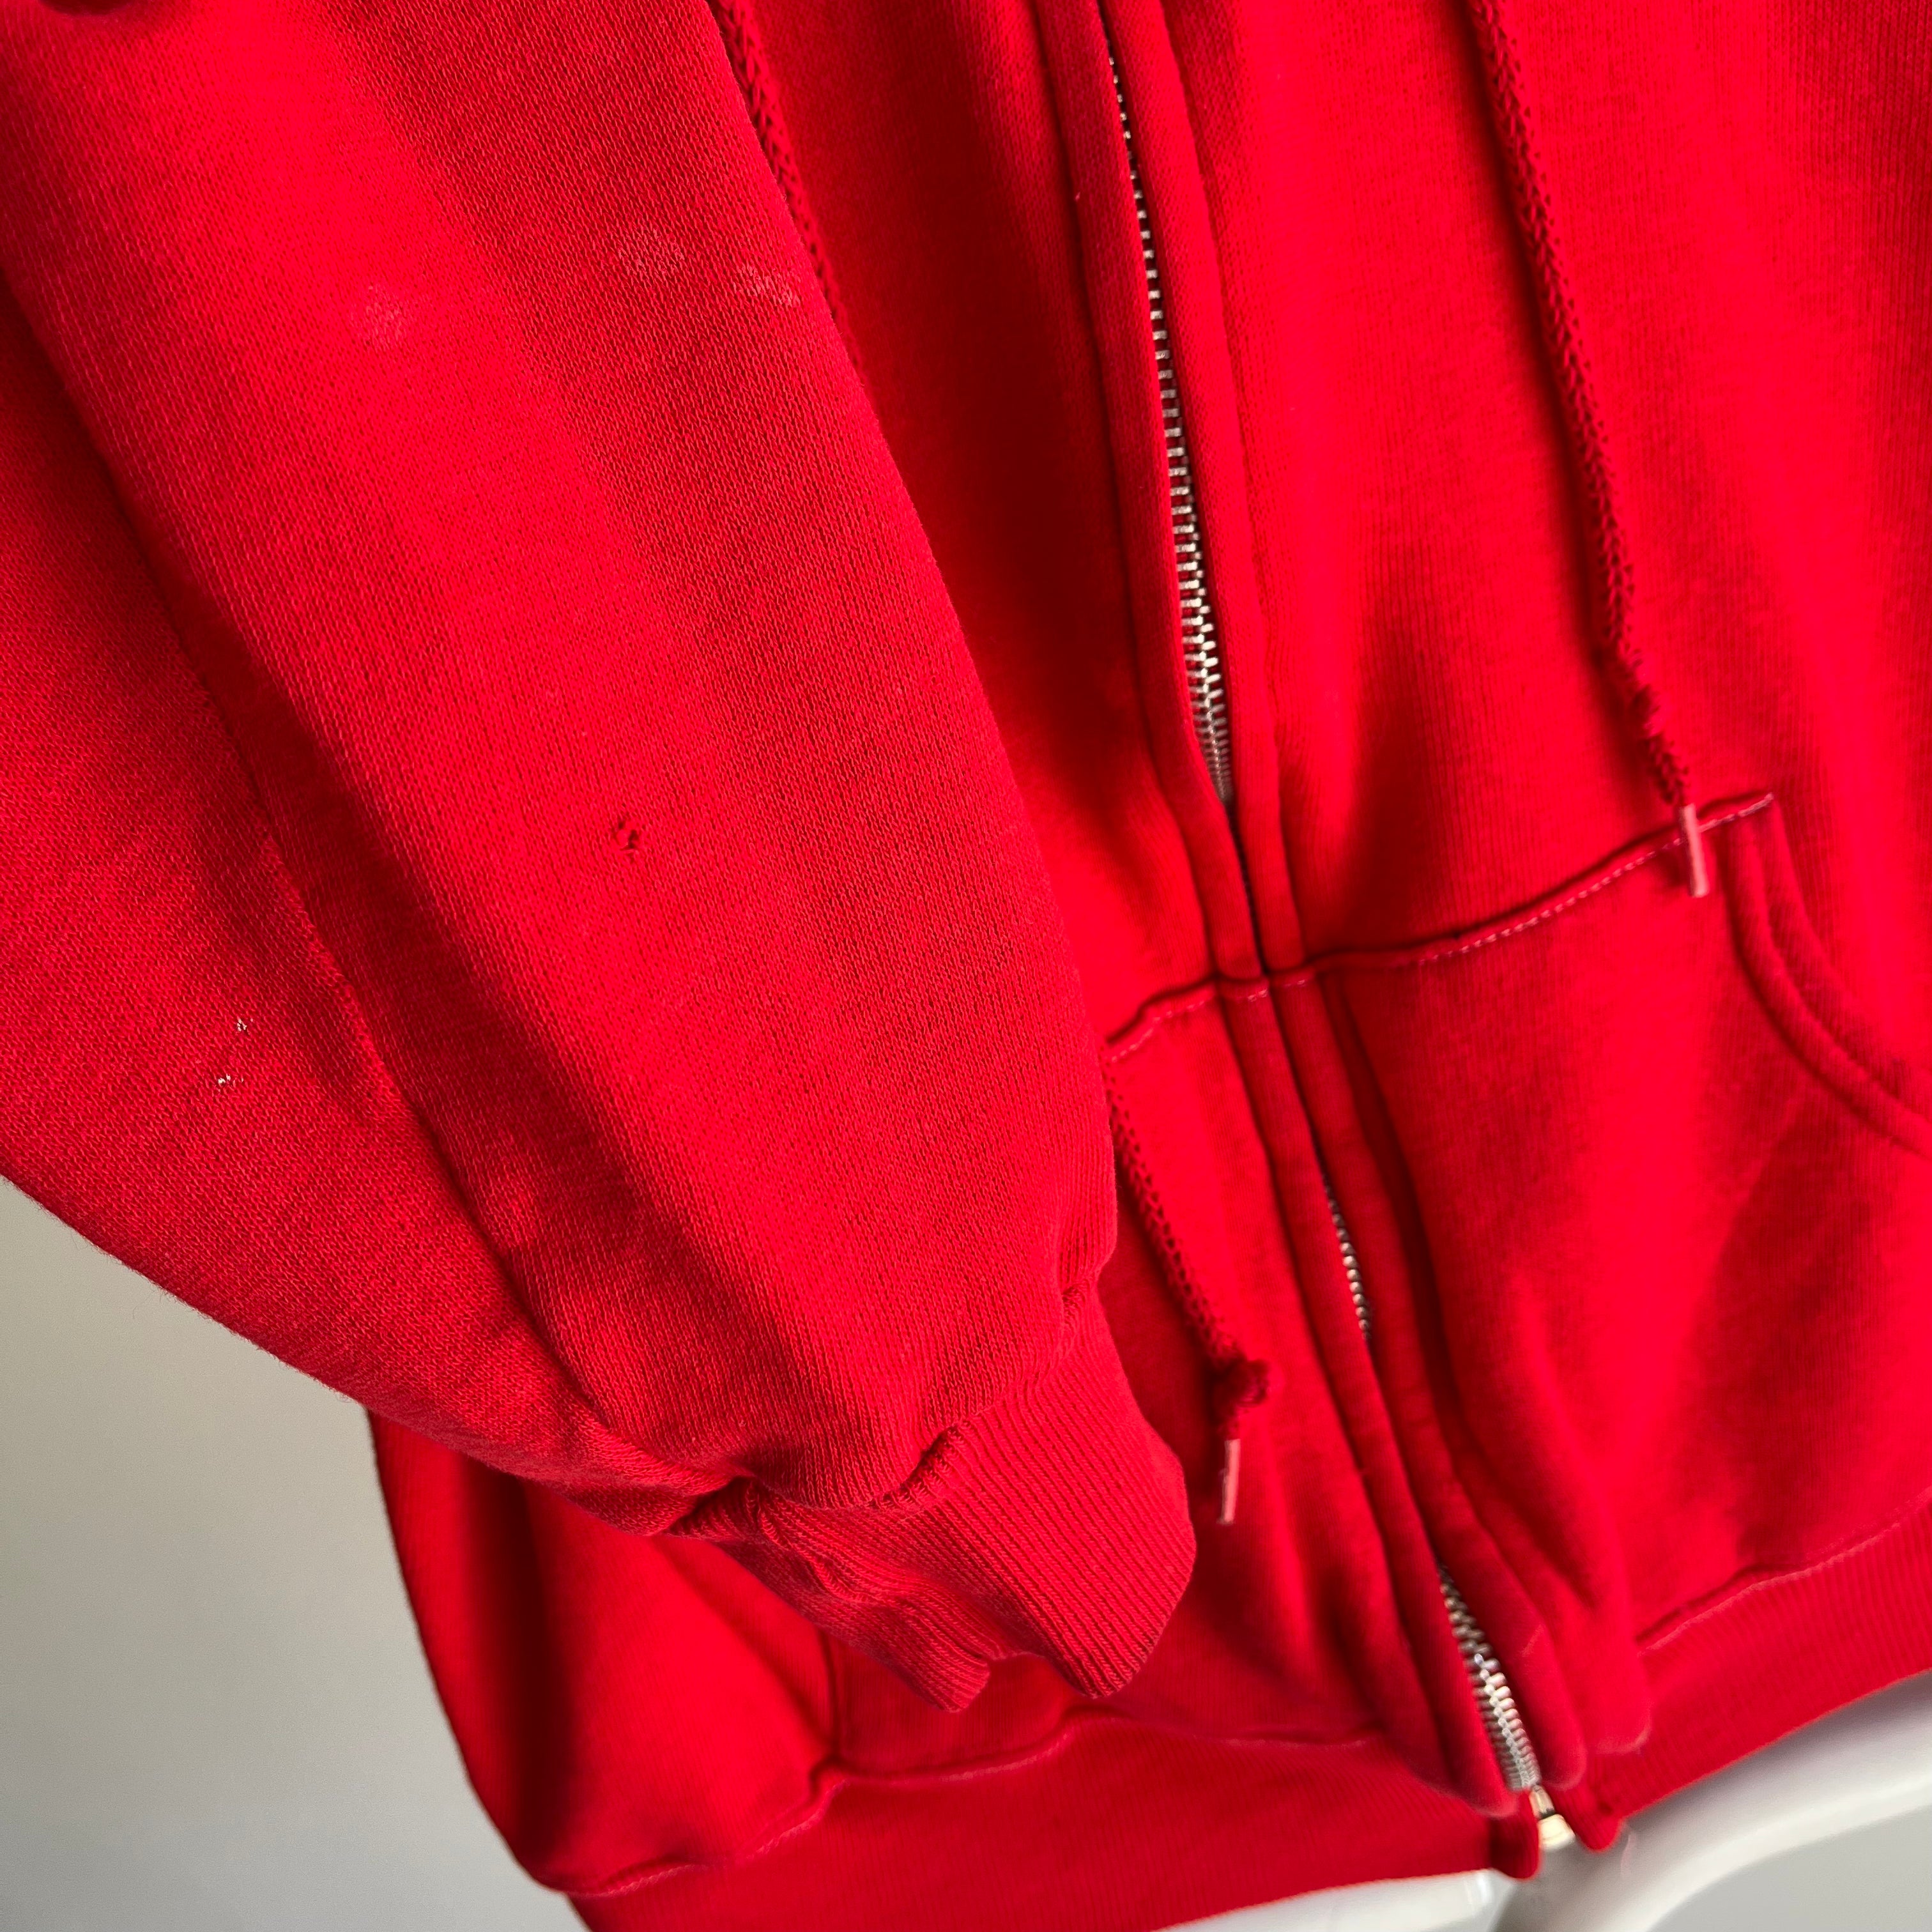 1980s Stained Red Zip Up Hoodie